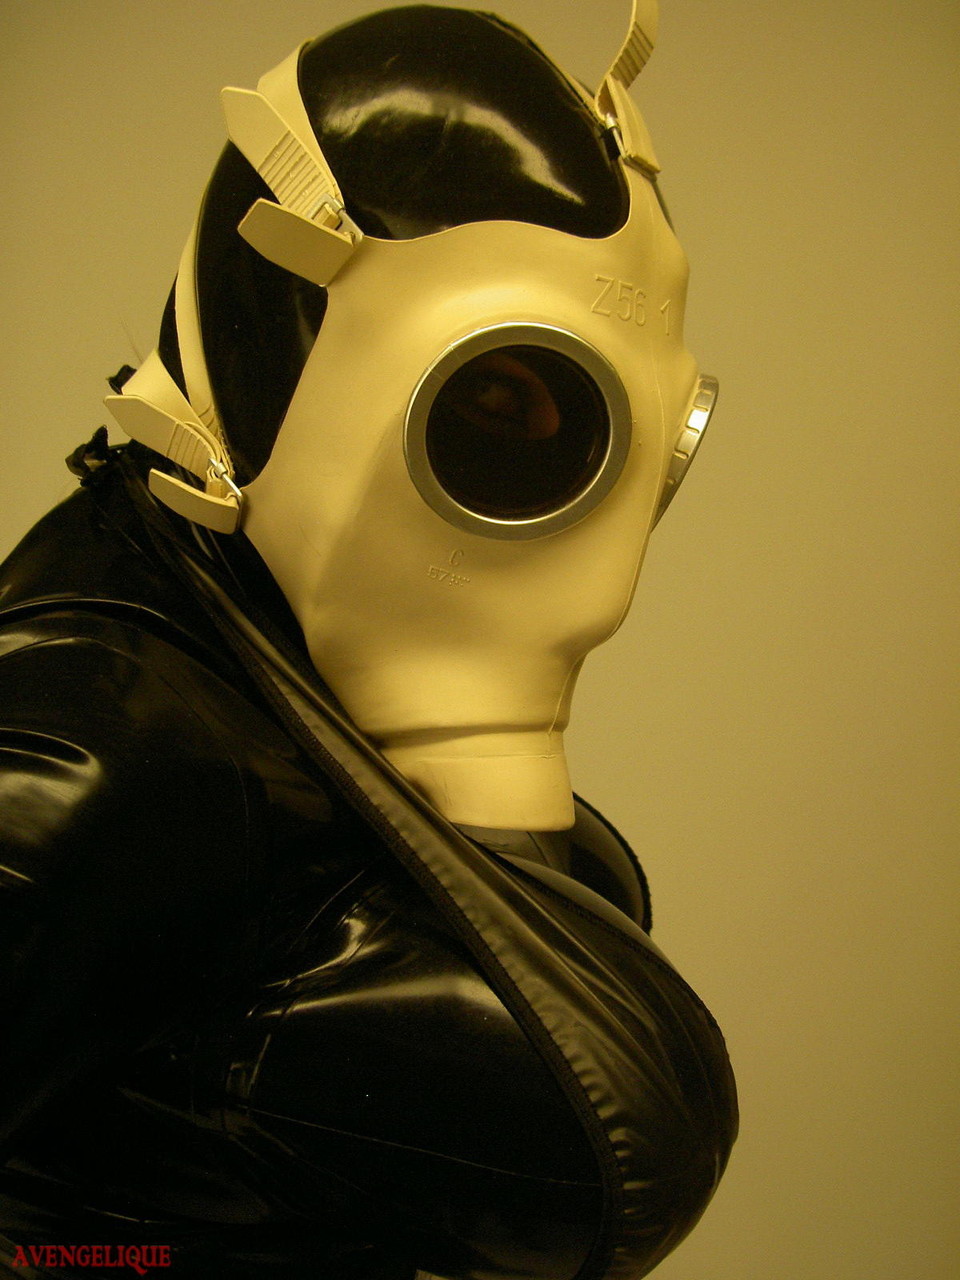 Solo model Darkwing Zero sports a gas mask while modelling latex clothing ポルノ写真 #428000392 | Rubber Tits Pics, Darkwing Zero, Latex, モバイルポルノ